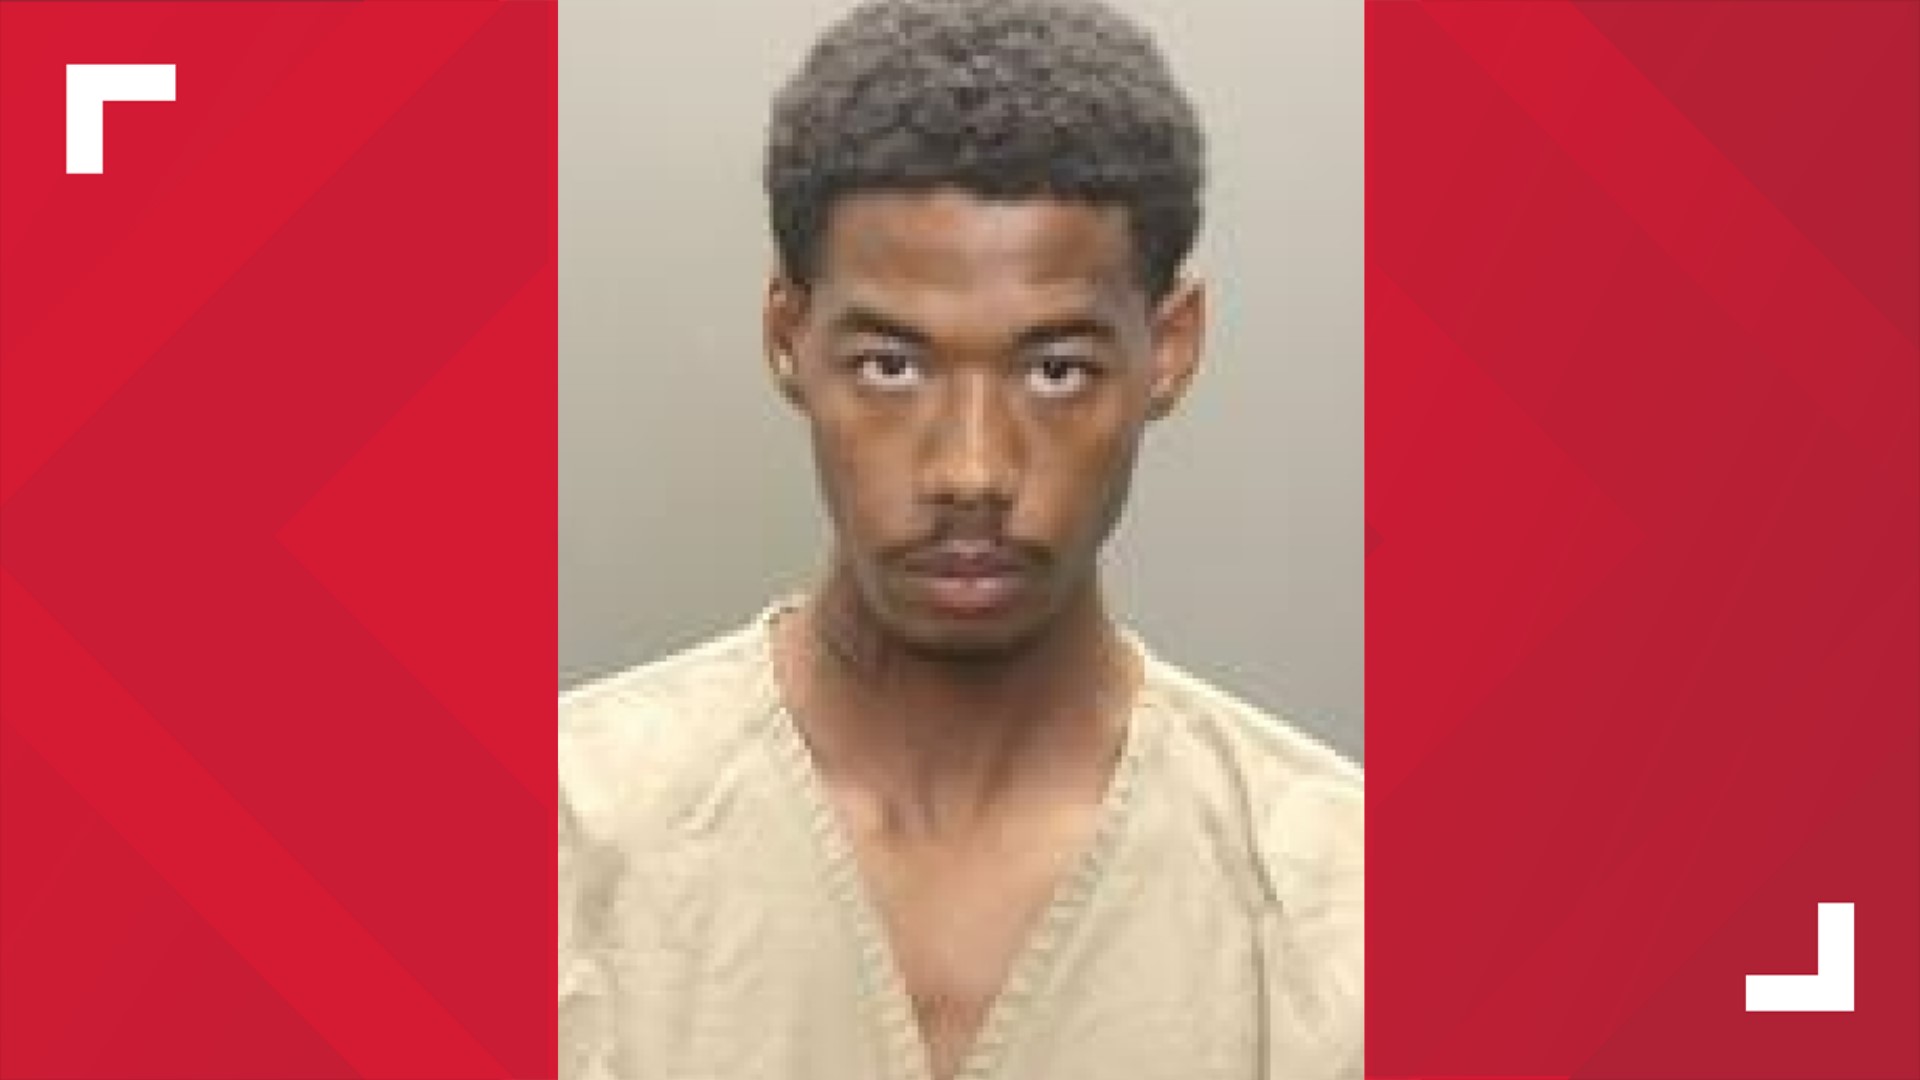 Demetrius Brown Jr., 19, was taken into custody Friday on a felonious assault charge that was filed for his arrest, according to court records.